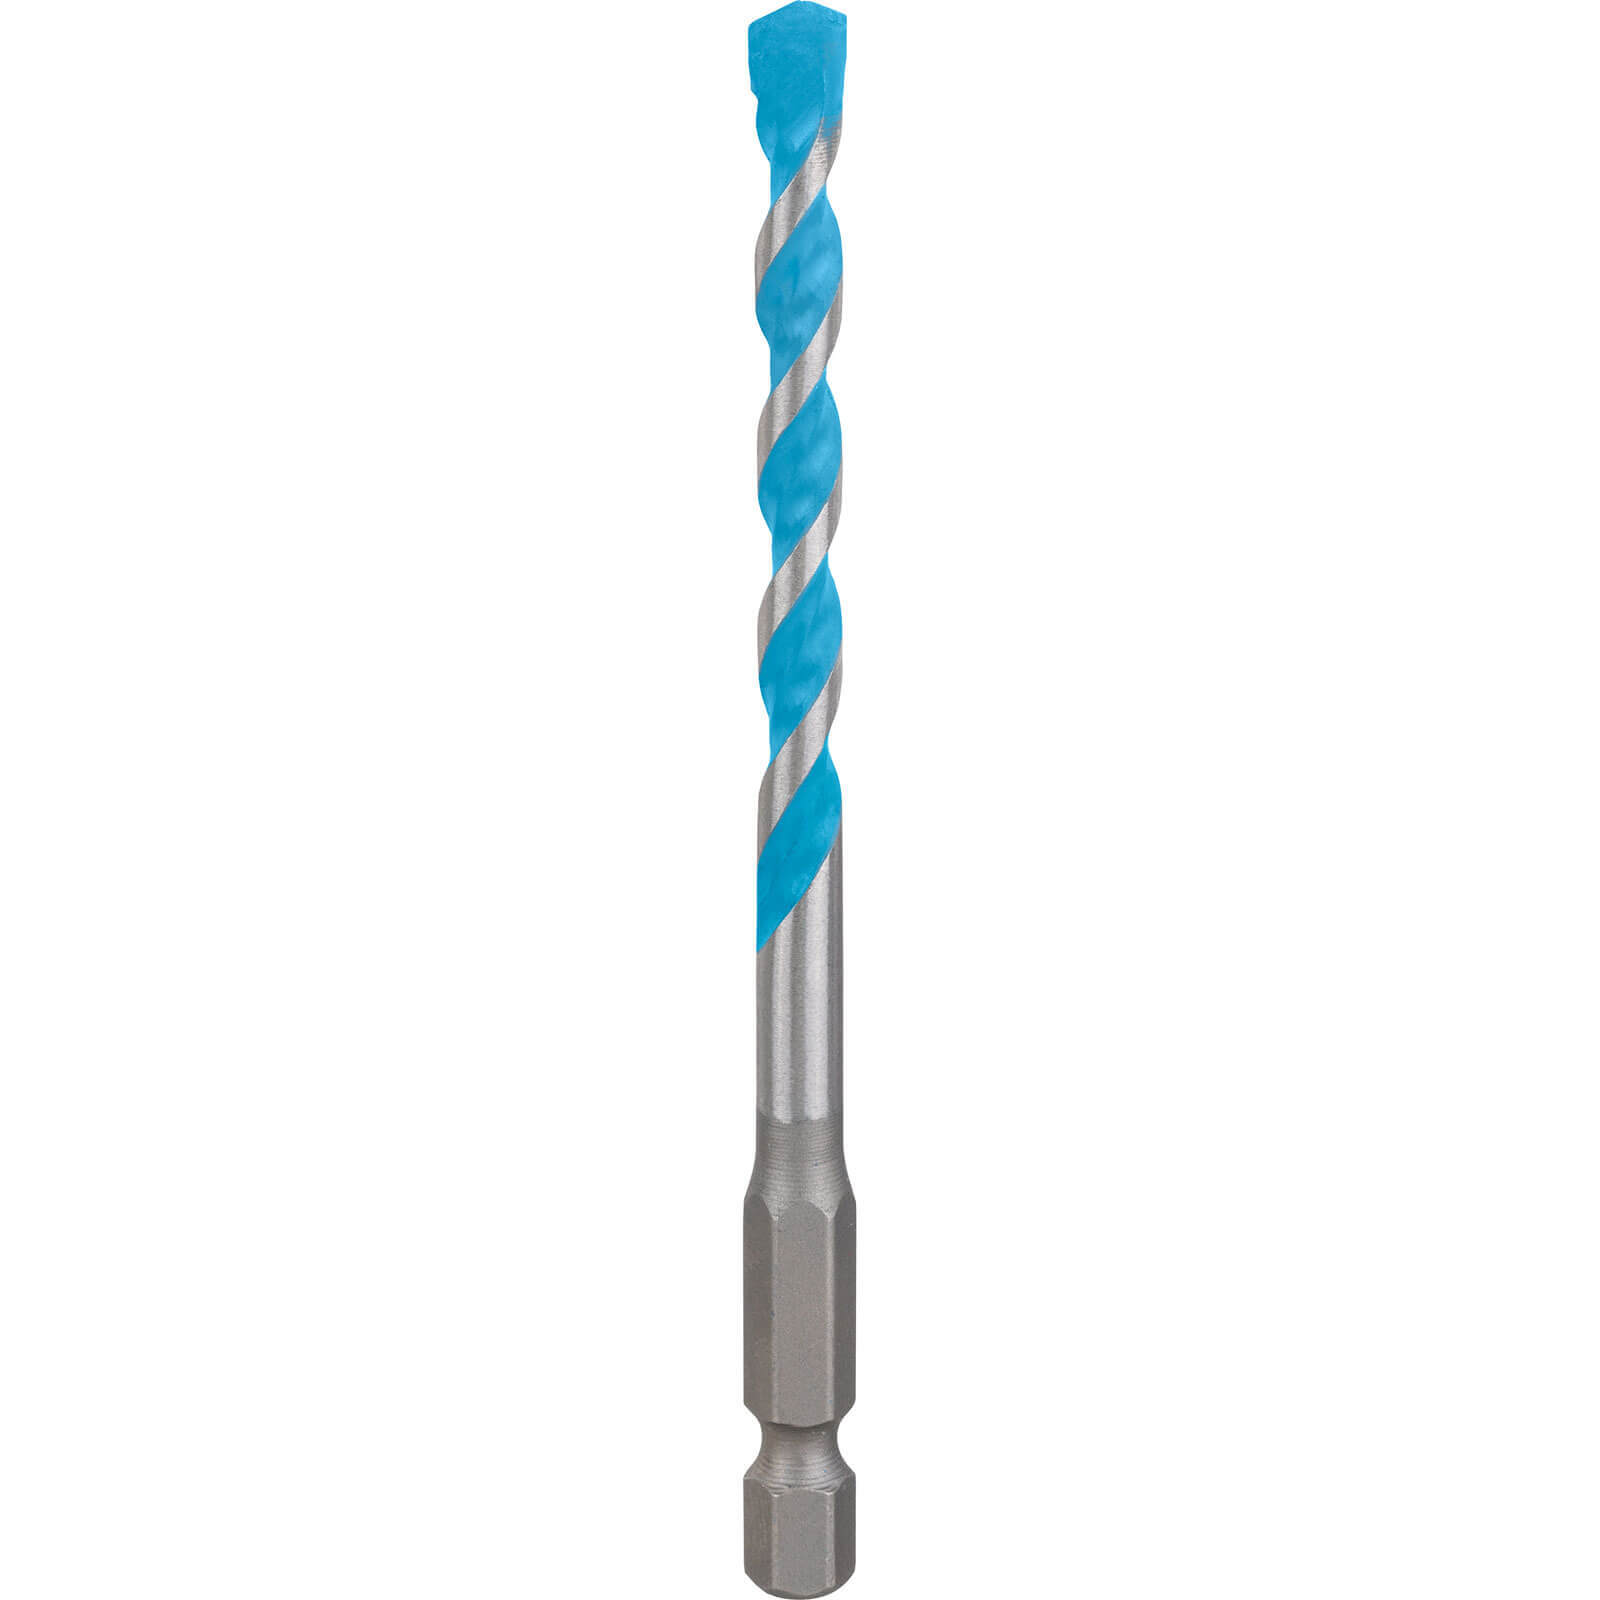 Image of Bosch Expert HEX-9 Multi Construction Drill Bit 6mm 100mm Pack of 1